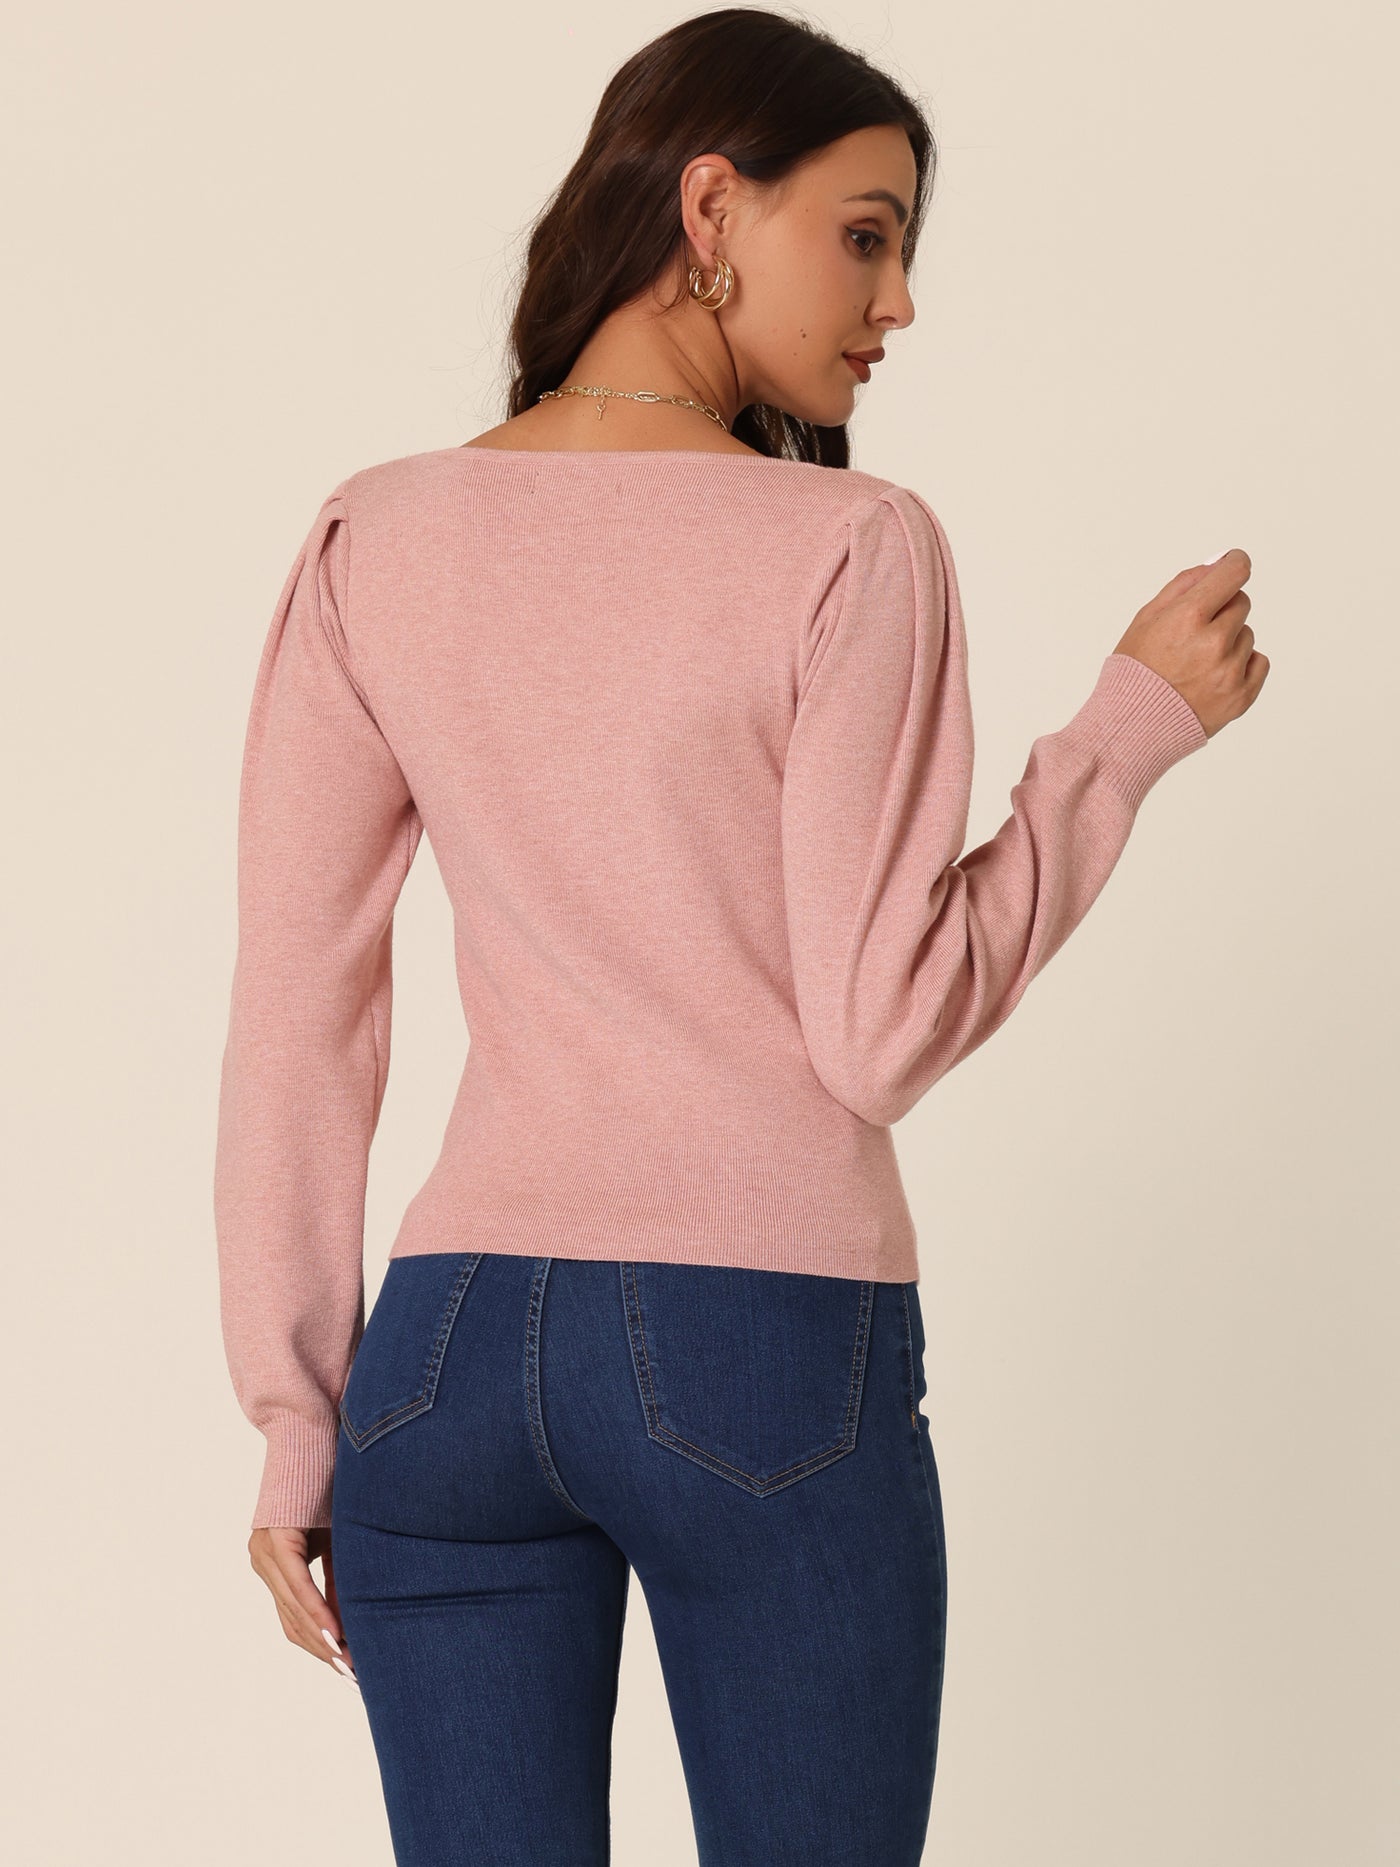 Bublédon Women's Casual Ribbed Knit Jumper Tops Long Sleeve Sweetheart Neck Solid Color Pullover Sweater